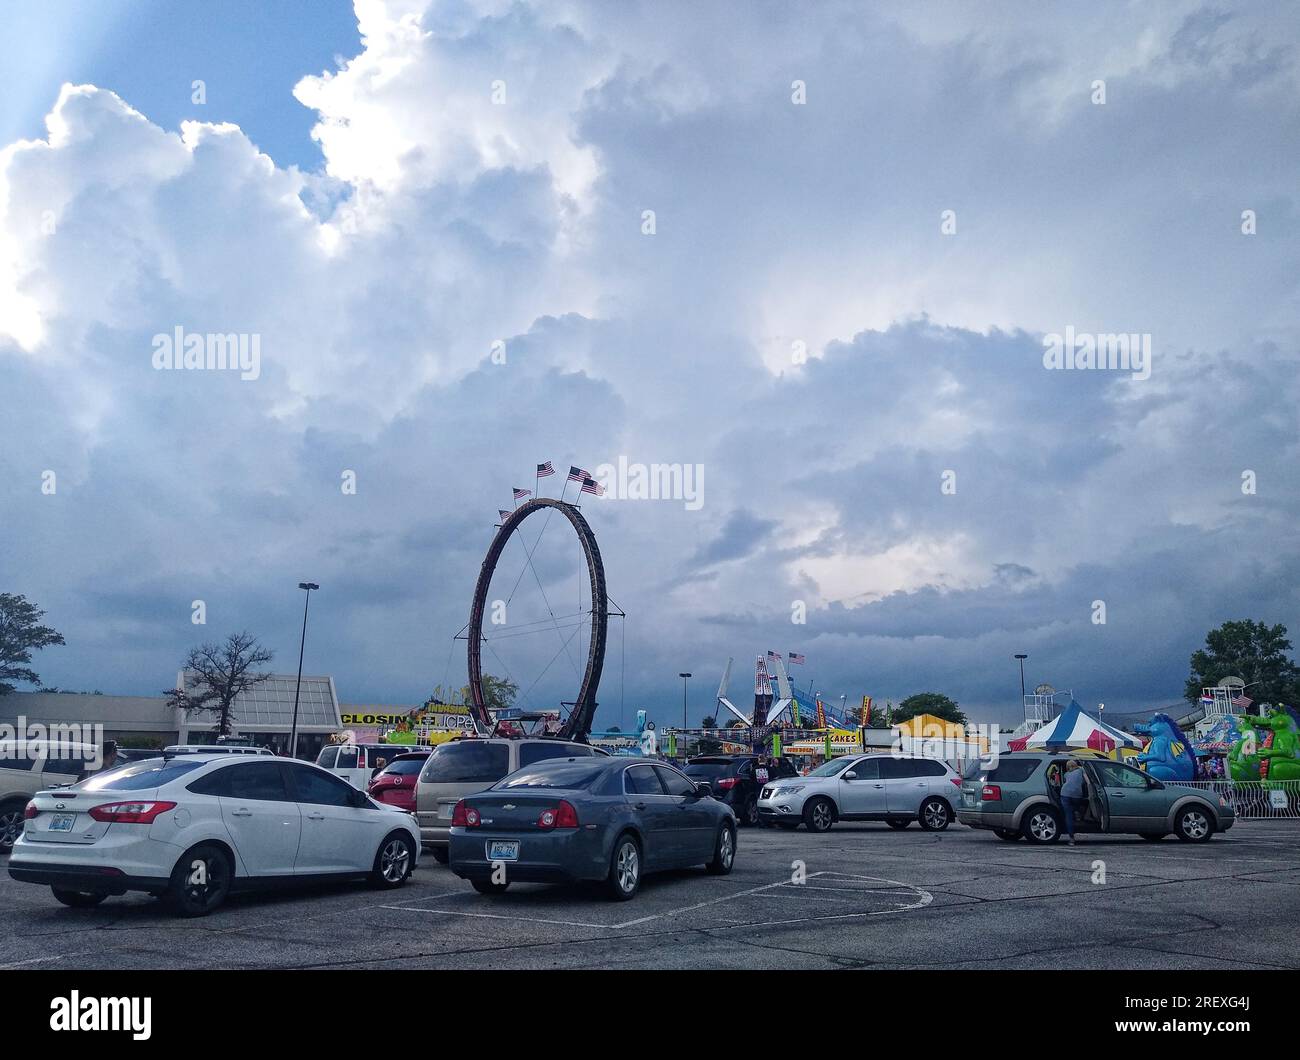 Carnival-goers retreat to their vehicles as a heavy thunderstorm rolls in on Saturday, July 30, 2020 at Towne Square Mall in Owensboro, Daviess County, KY, USA. Total rain accumulation for the day was approximately 1.9 inches. (Apex MediaWire Photo by Billy Suratt) Stock Photo